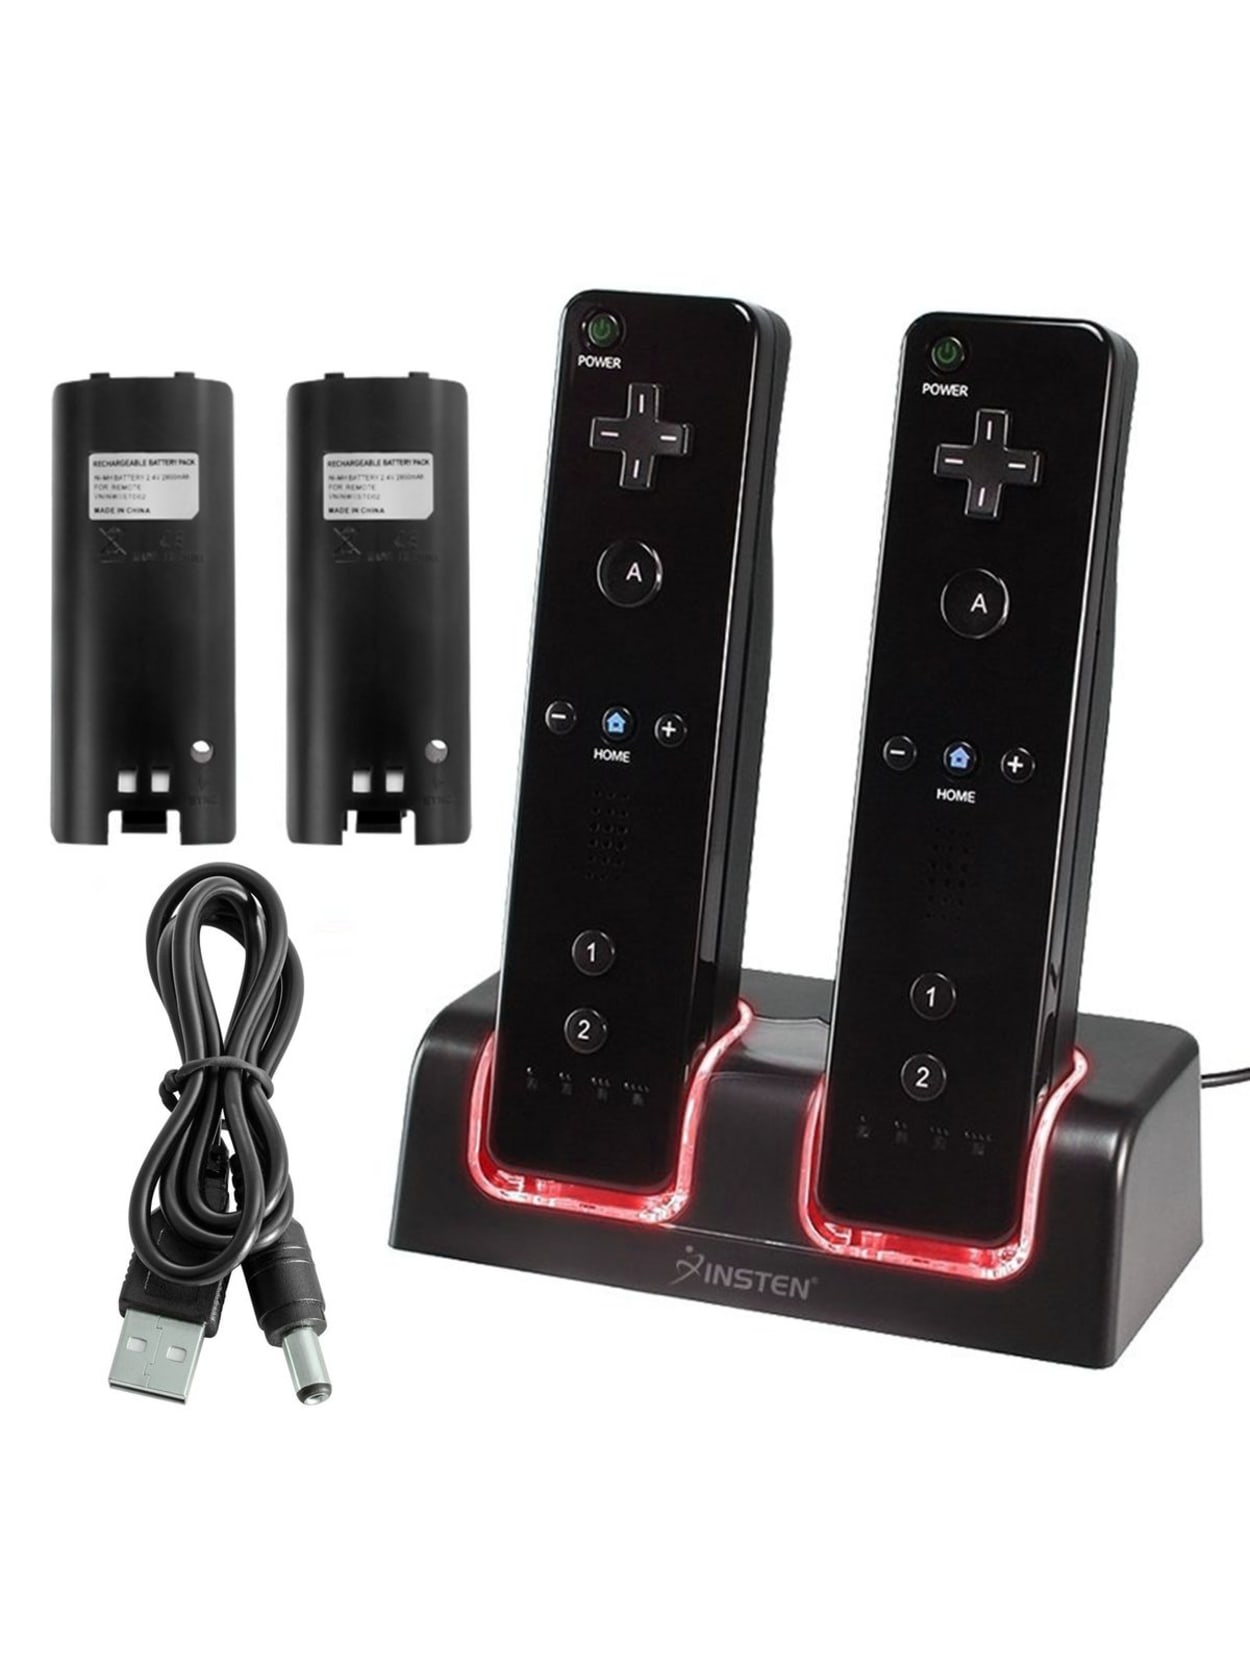 wii charging station